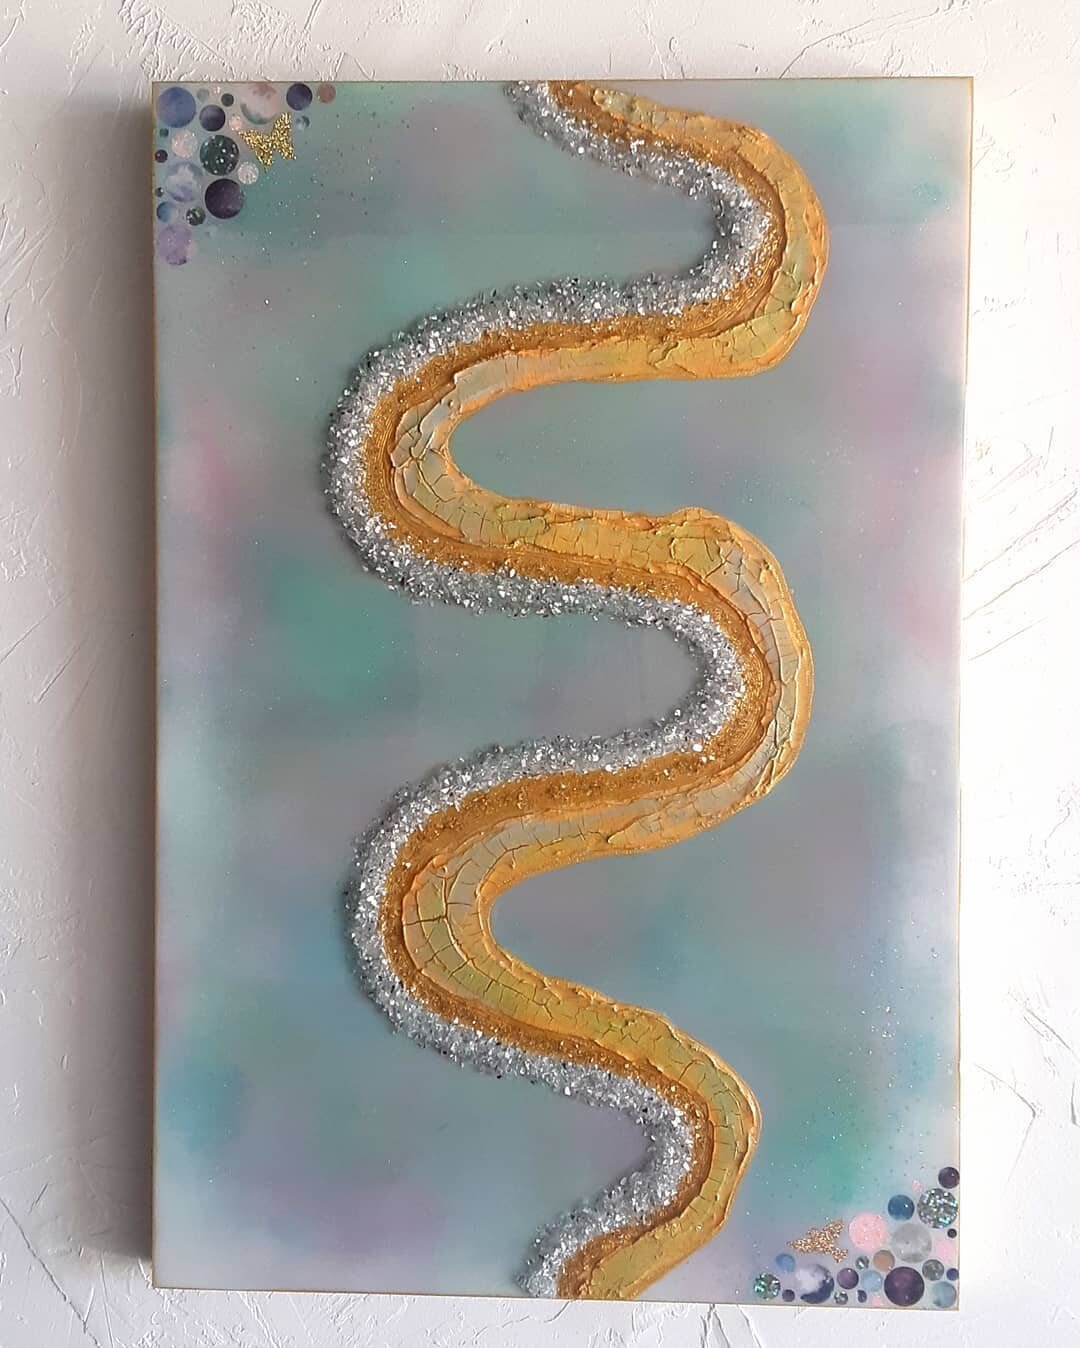 Mixed Media Art by @tinasartlife is up on the walls at the New Savage Mystic Gallery on S. Virginia Street. Join us for our Grand Opening on July 17 to see beautiful works of art inspired by Rumi poems, explore the new space, and maybe even receive a